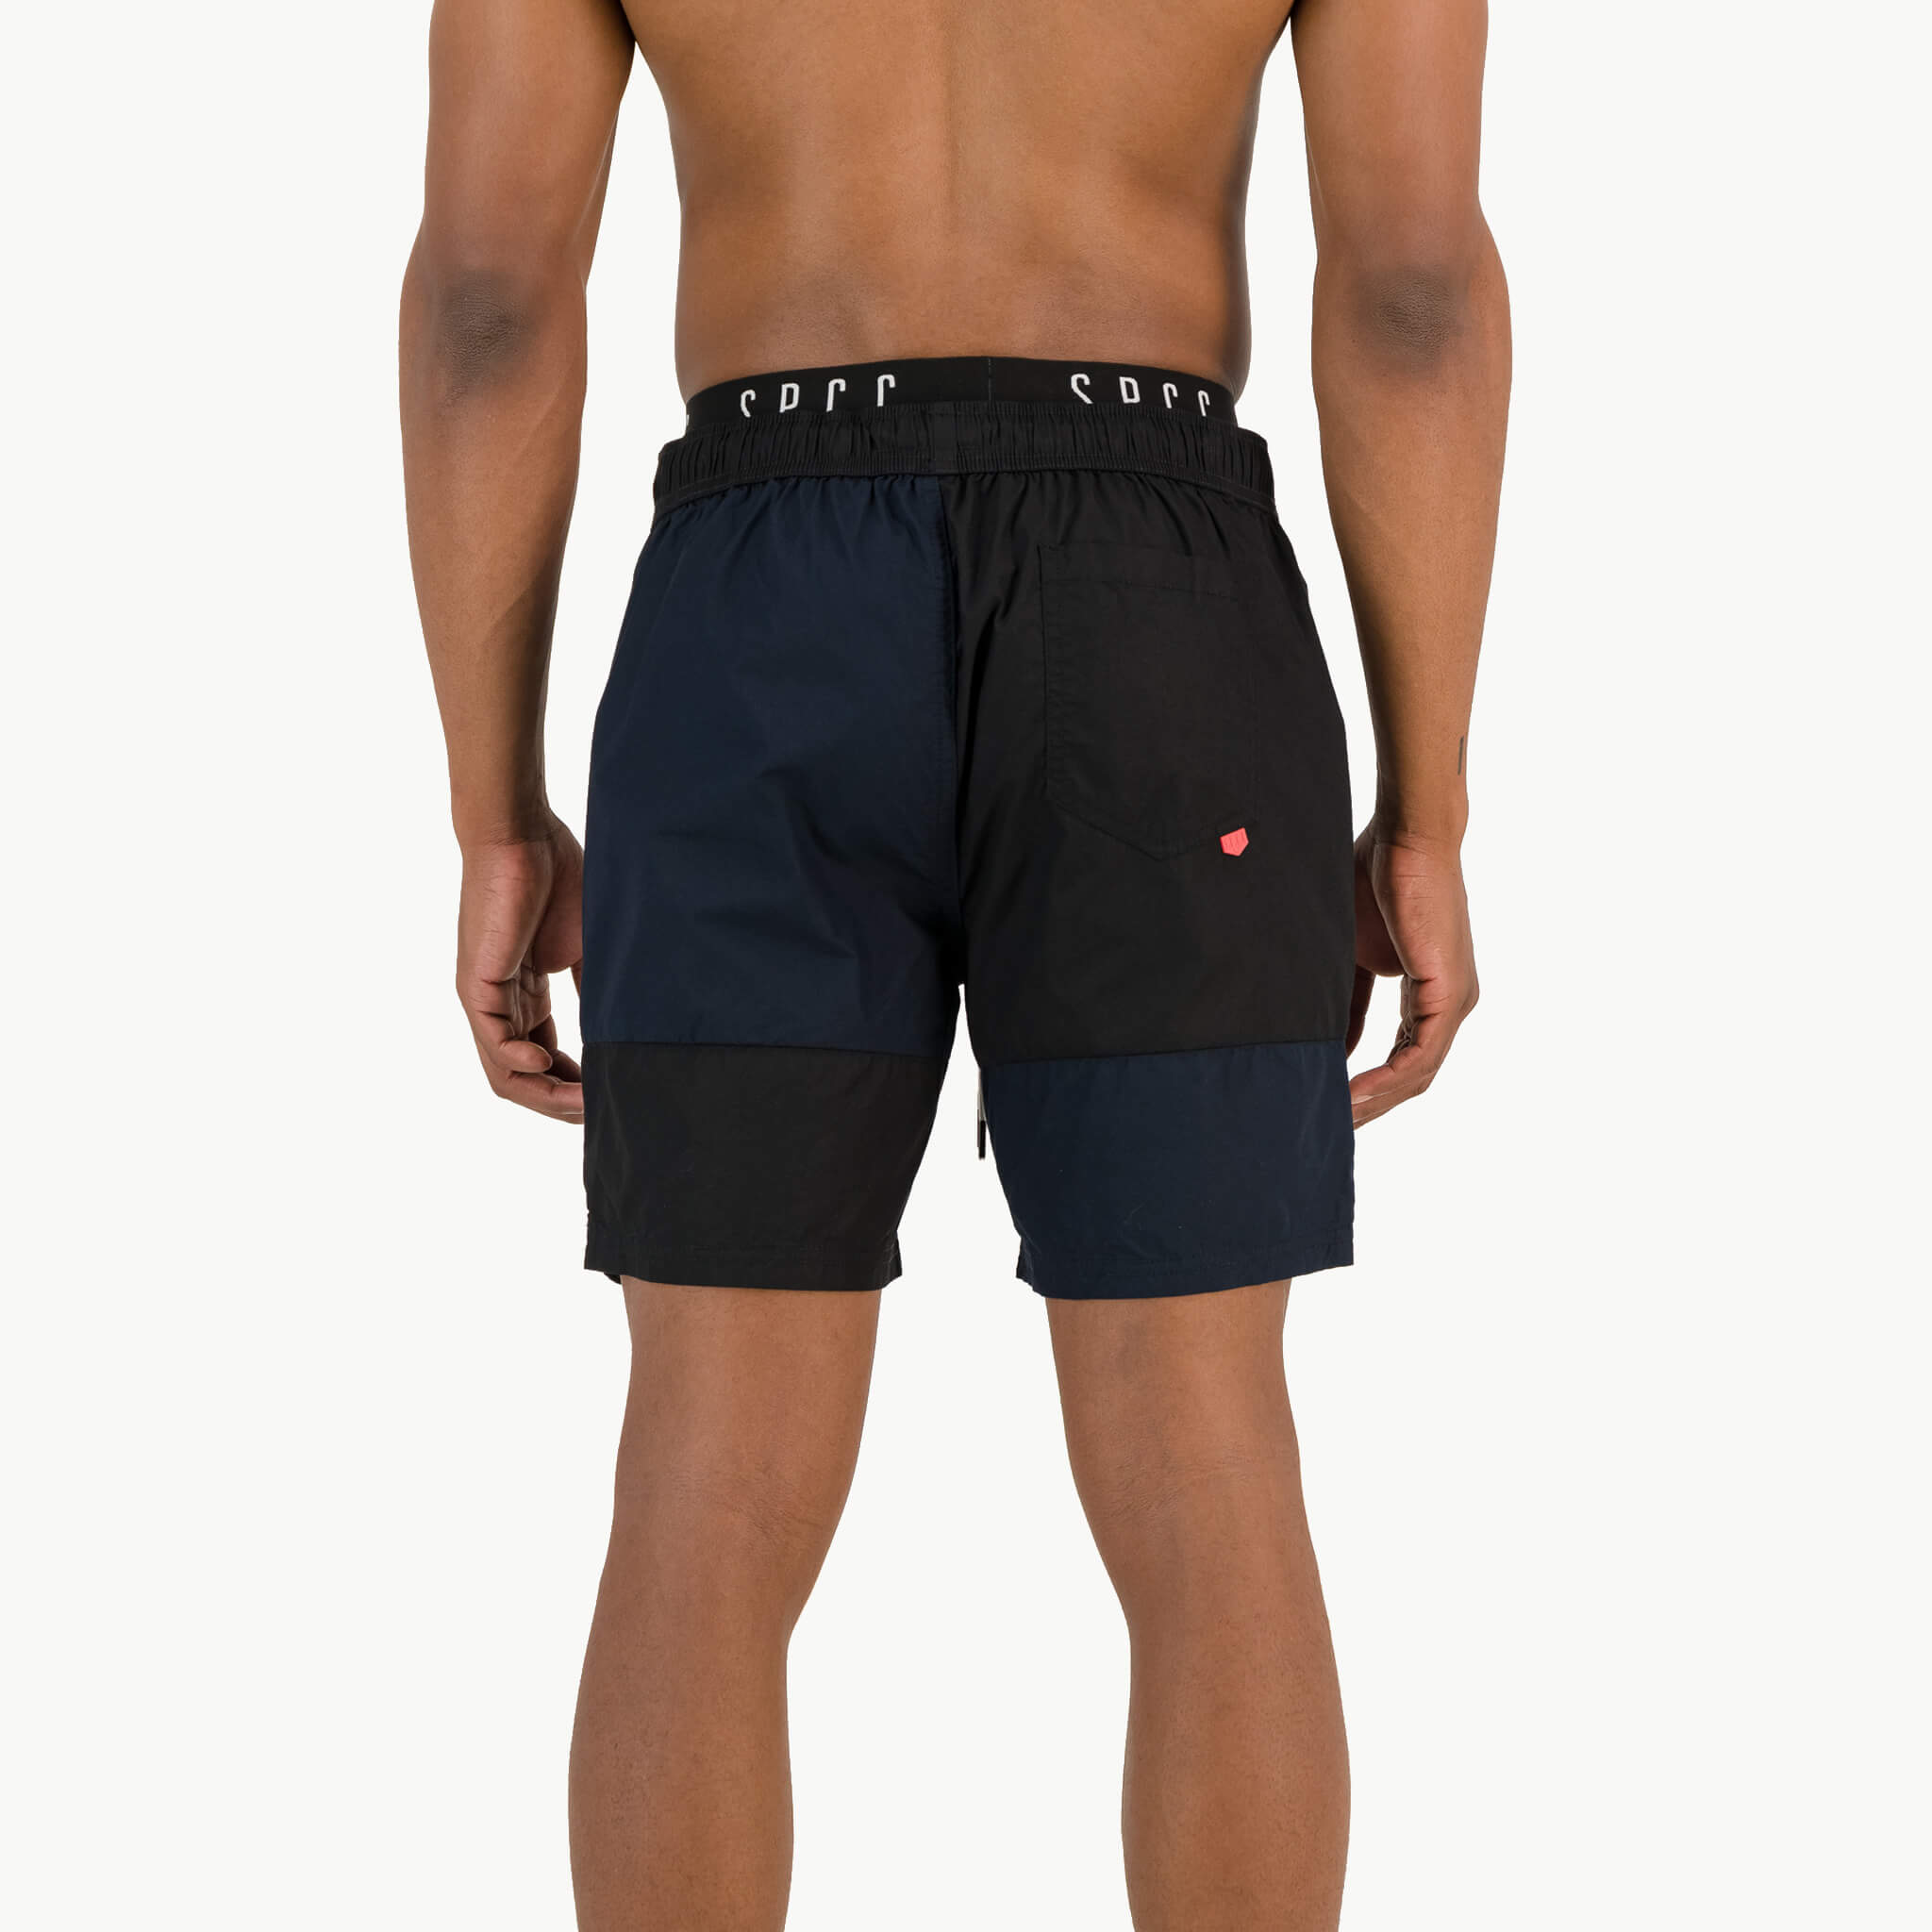 Mansel Pool Short - Navy/Ink – S.P.C.C Official Store